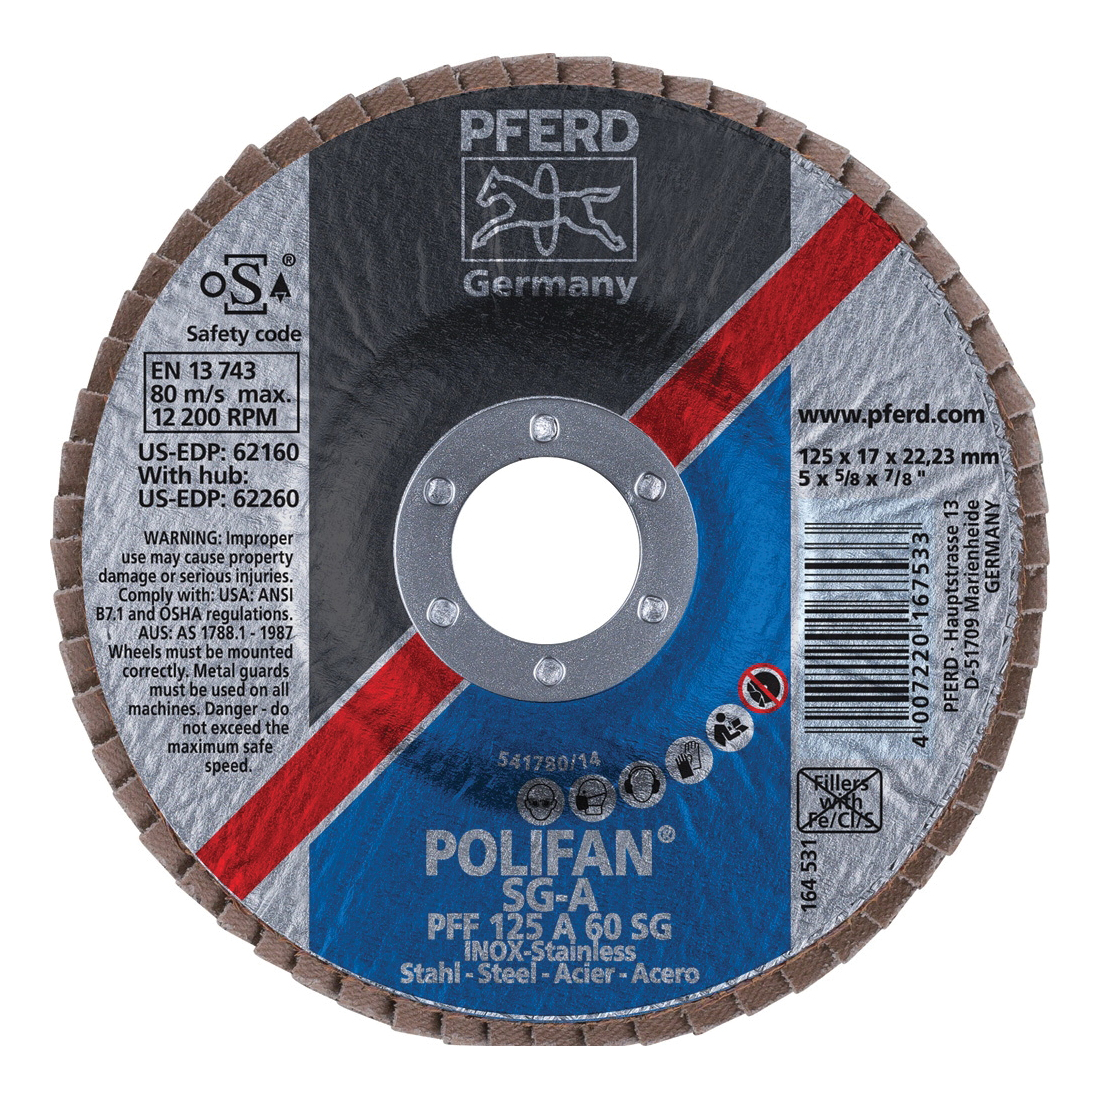 PFERD Polifan® 62160 Performance Line SG A Unthreaded Coated Abrasive Flap Disc, 5 in Dia, 7/8 in Center Hole, 60 Grit, Aluminum Oxide Abrasive, Type 27 Flat Disc